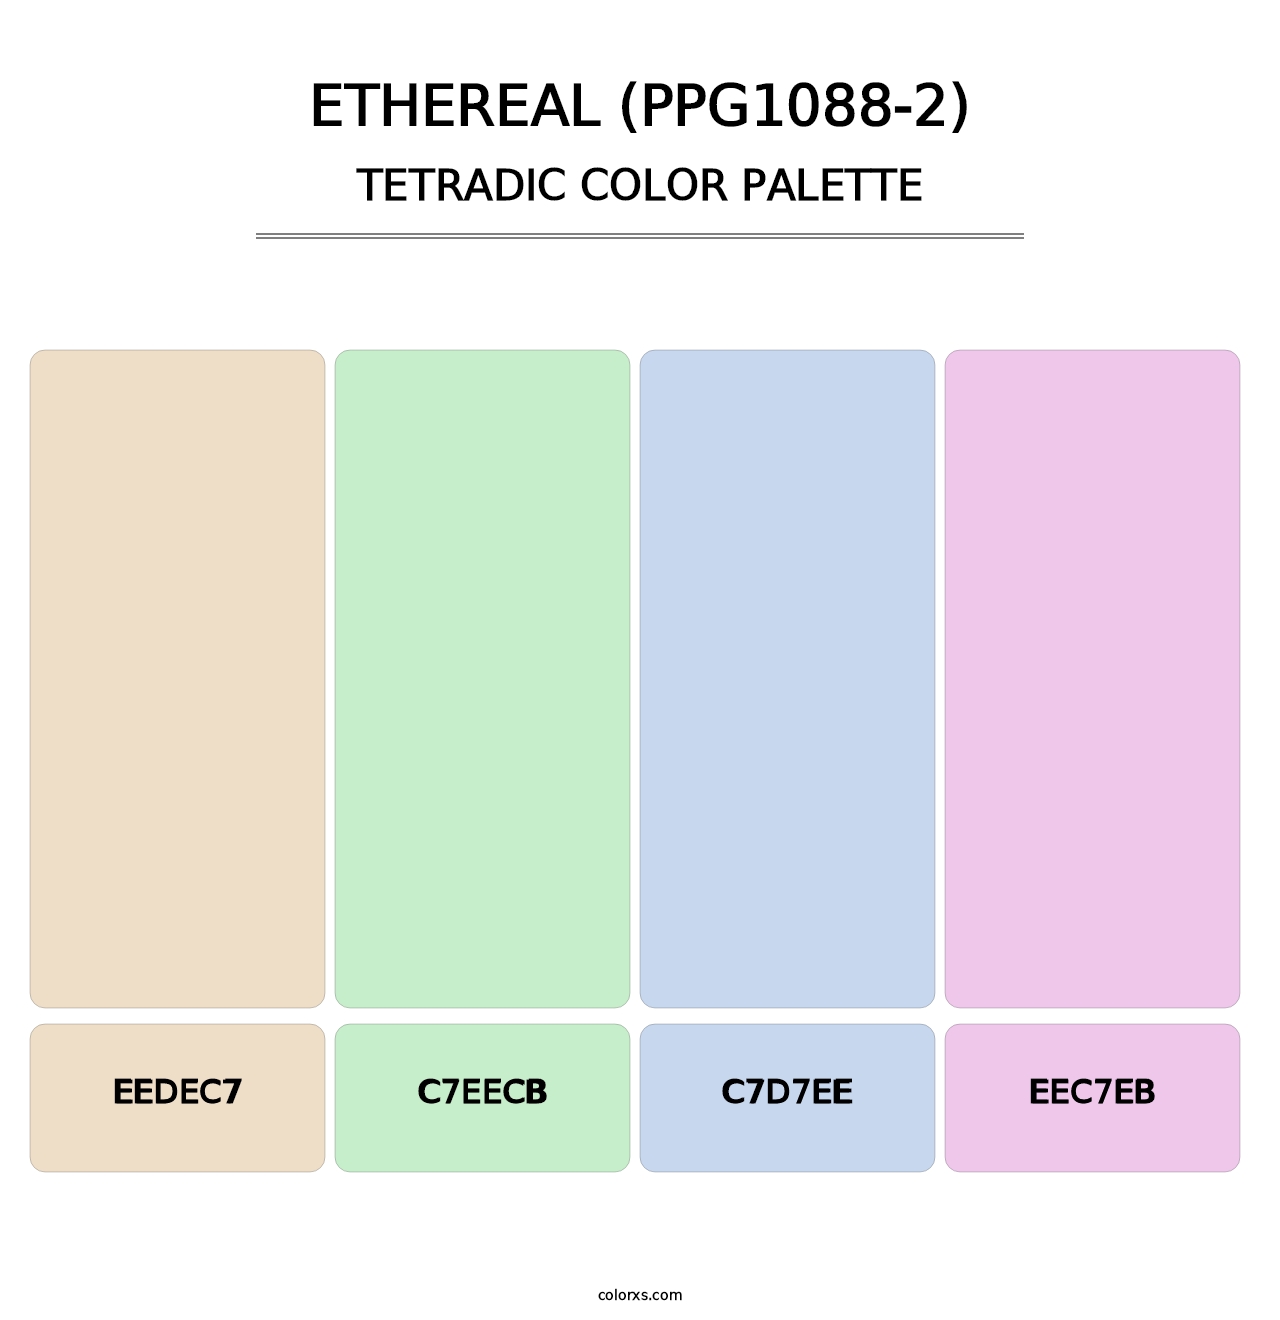 Ethereal (PPG1088-2) - Tetradic Color Palette